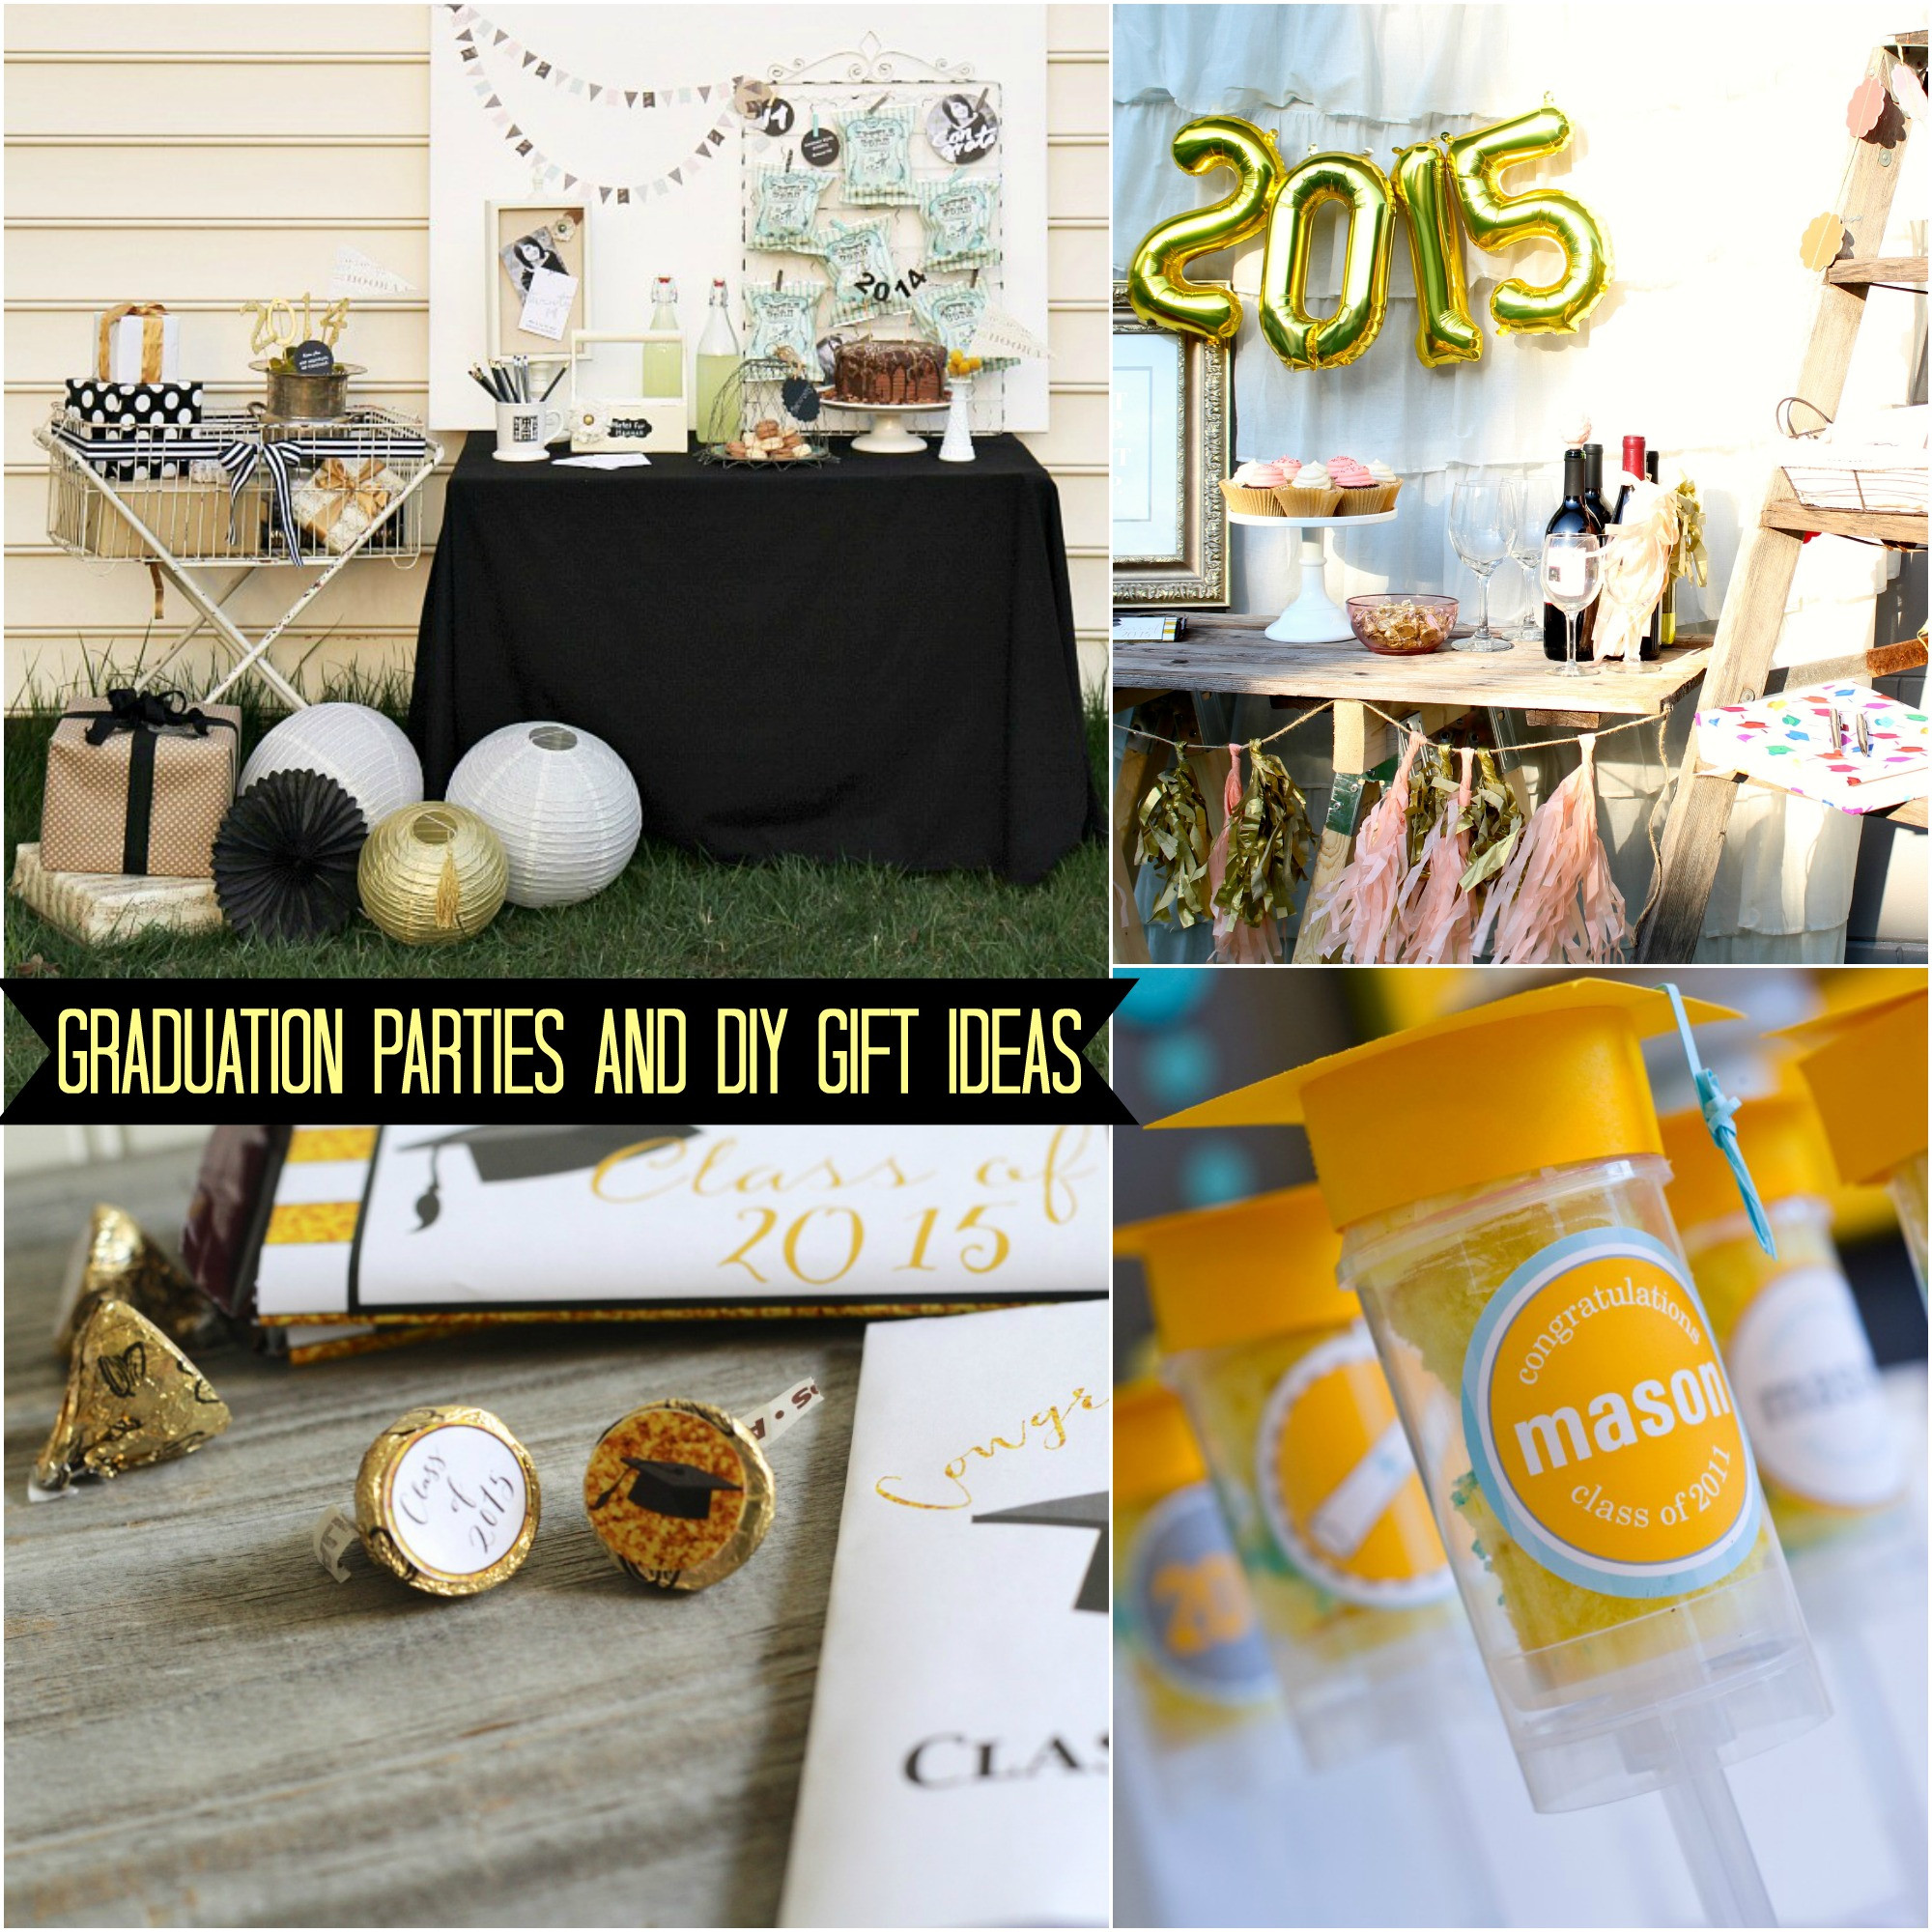 Graduation Party Gift Table Ideas
 Graduation Parties and DIY Gift Ideas